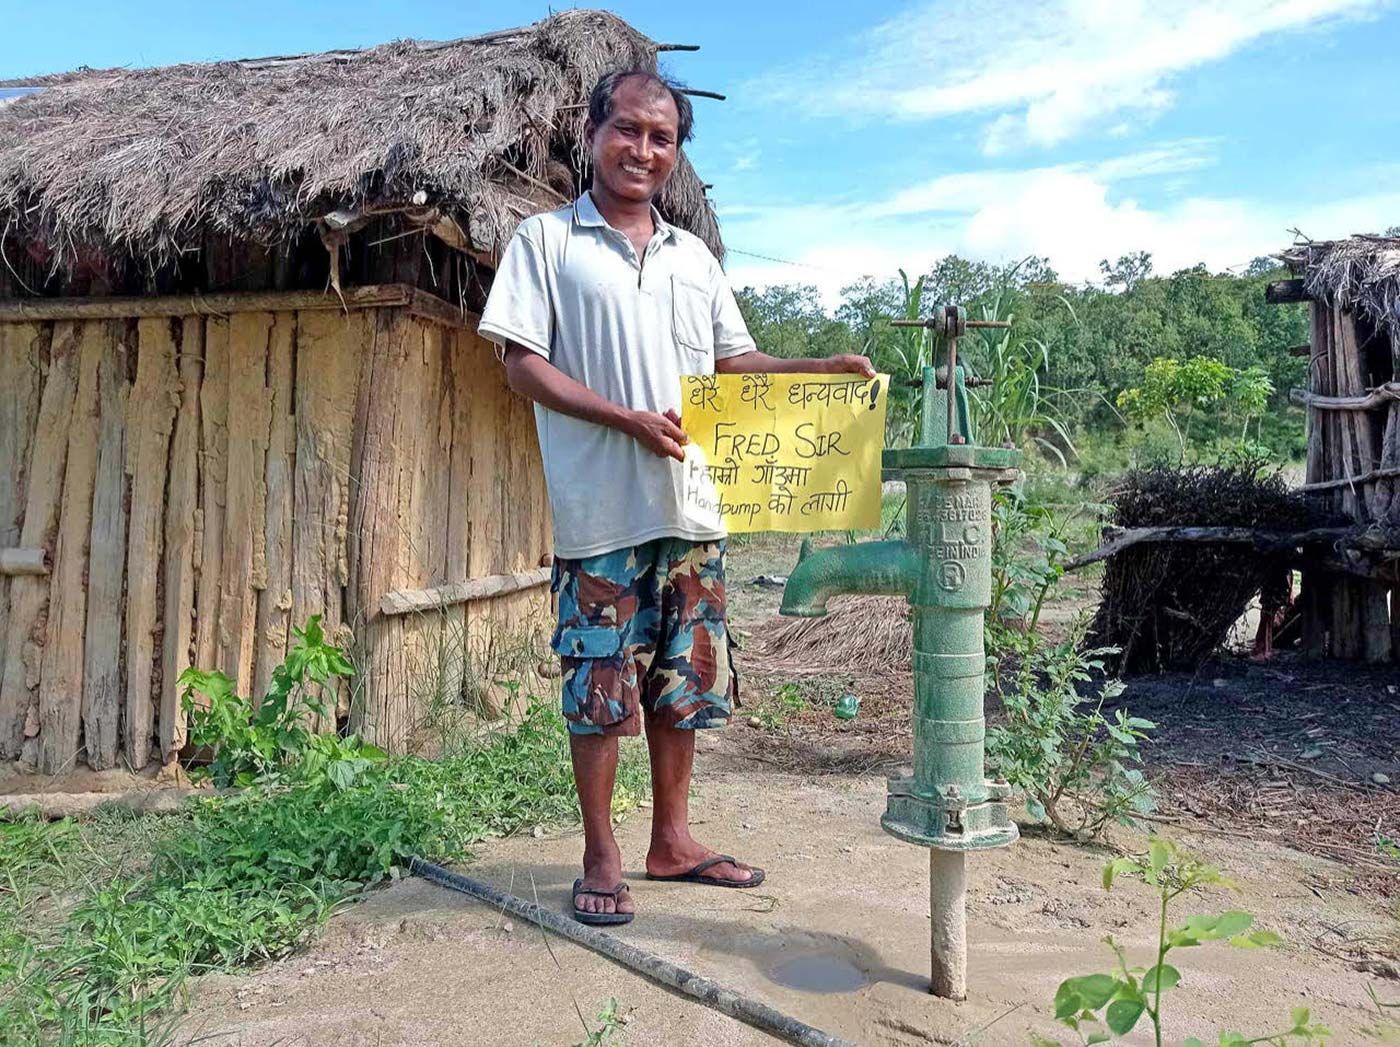 Devendapur village Head outside his house with one of the new water pumps supplied by One Golden angel